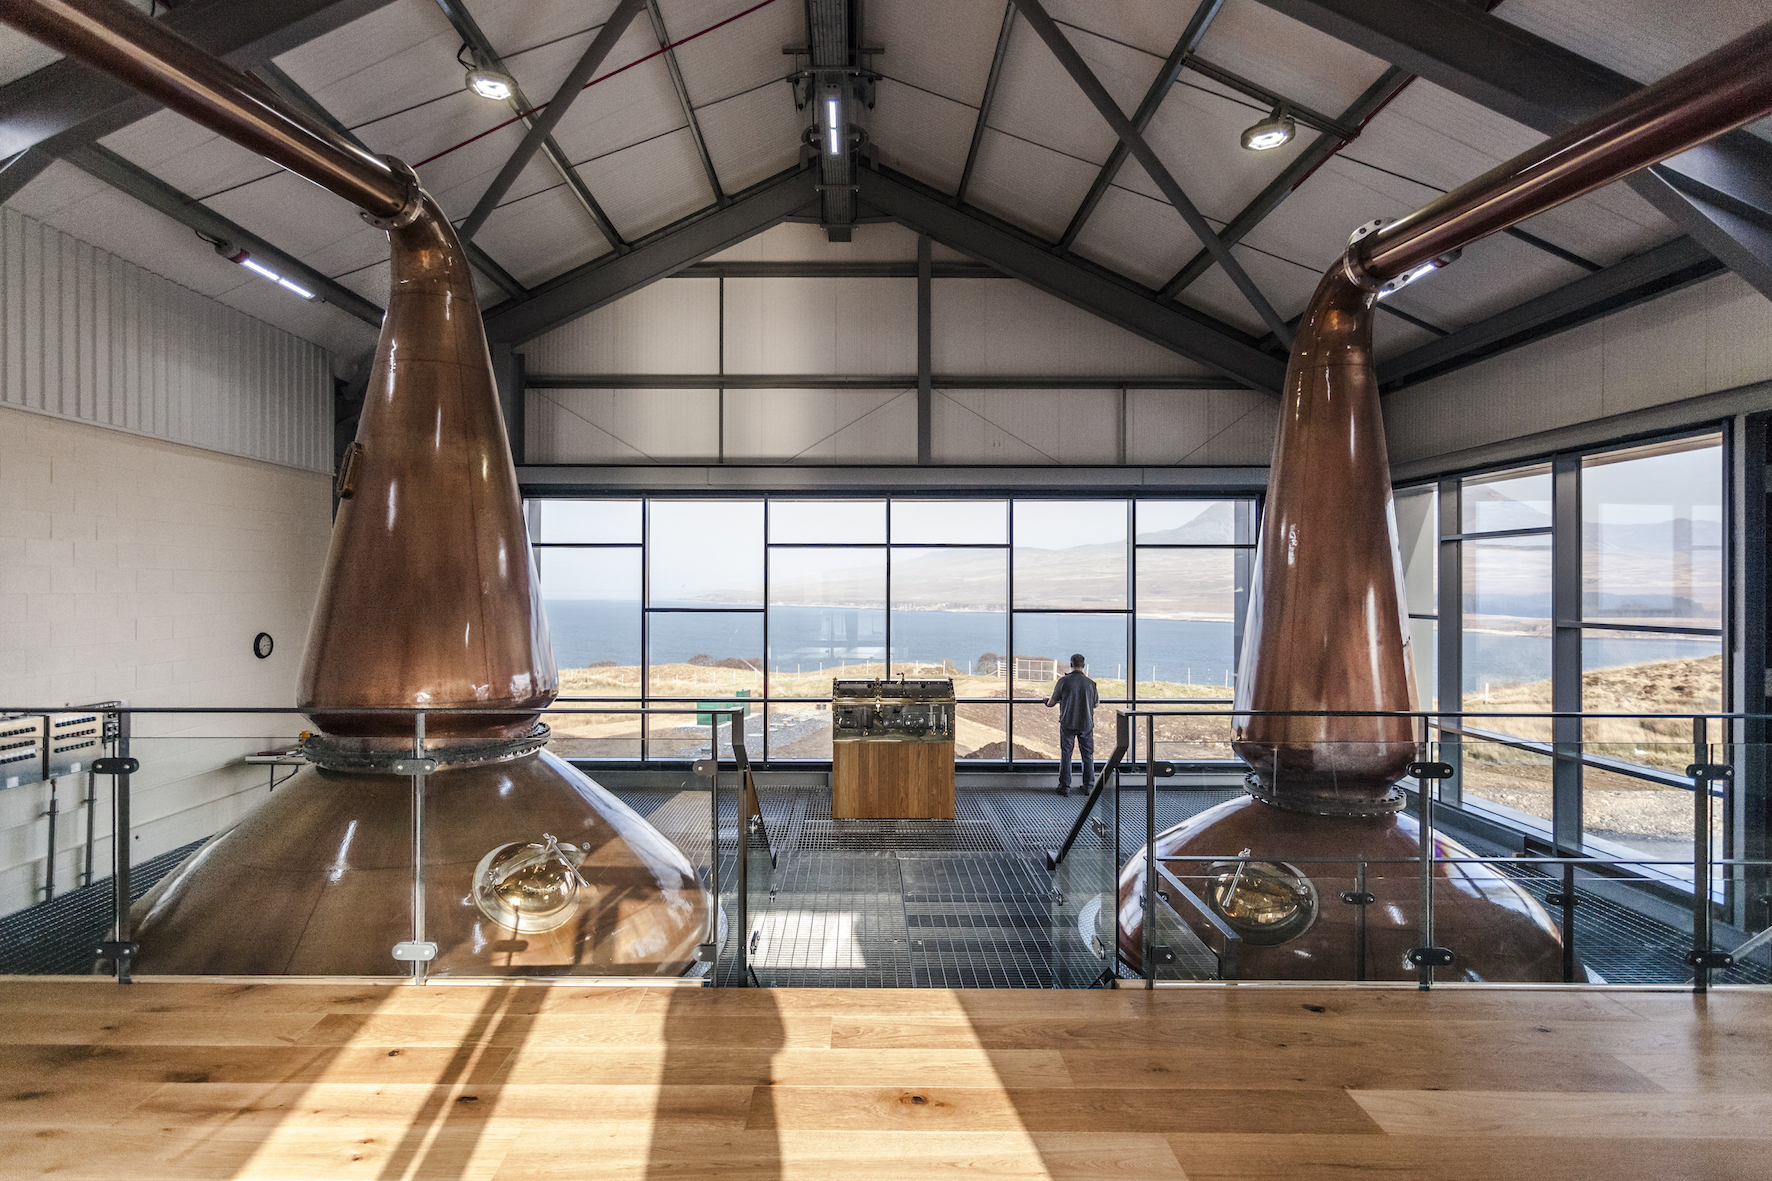 Ardnahoe Distillery opens after £12m investment